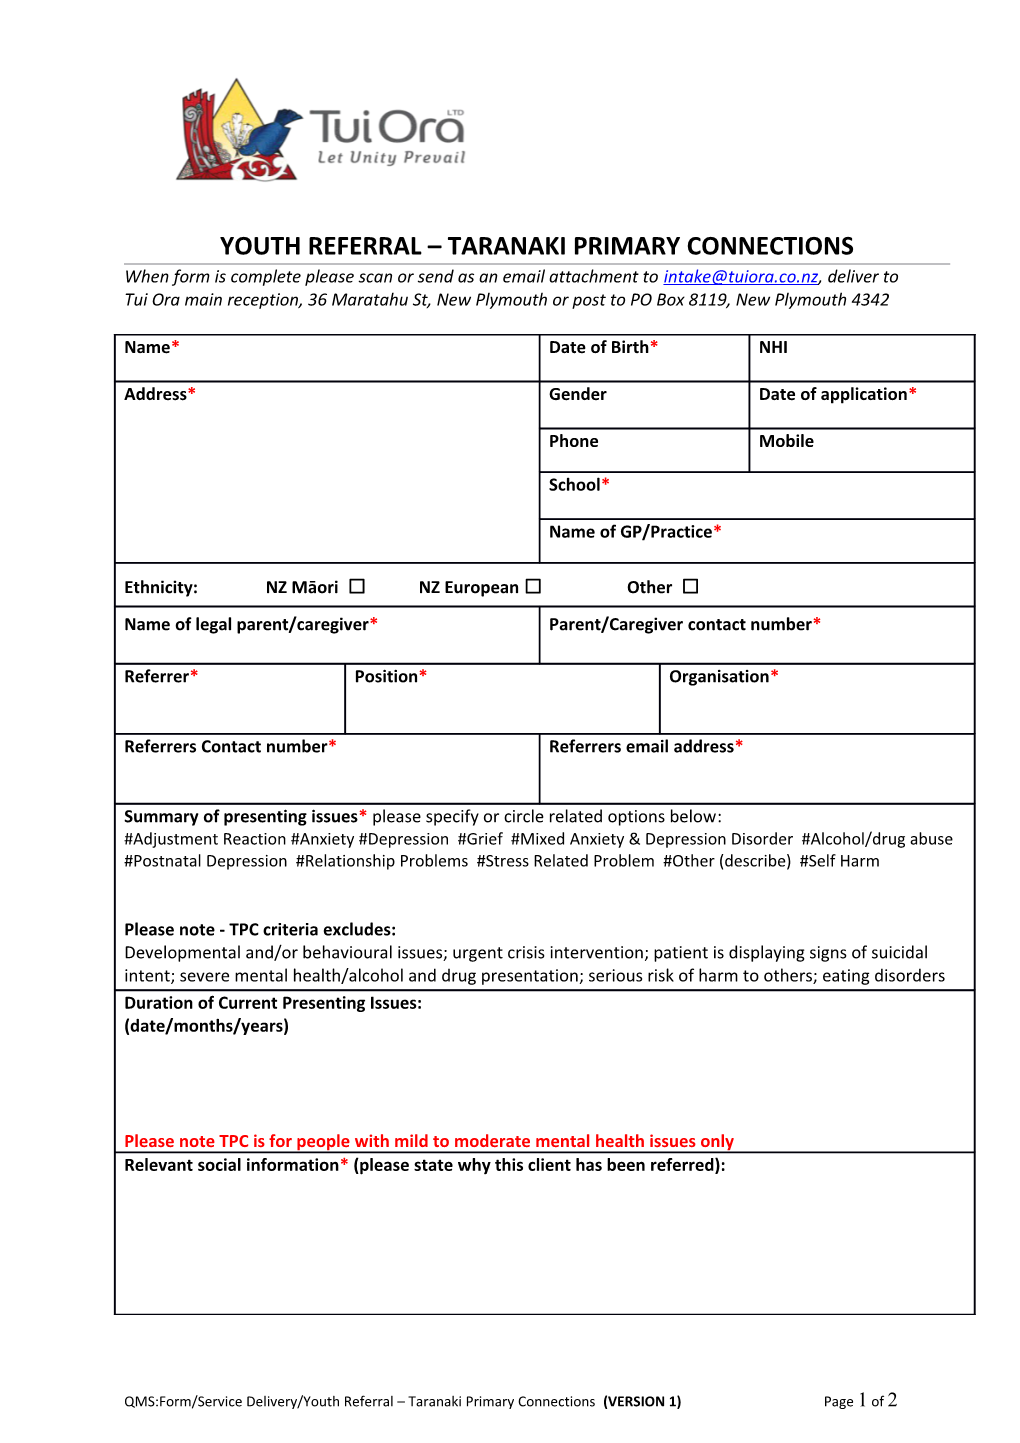 Youth Referral - Taranaki Primary Connections